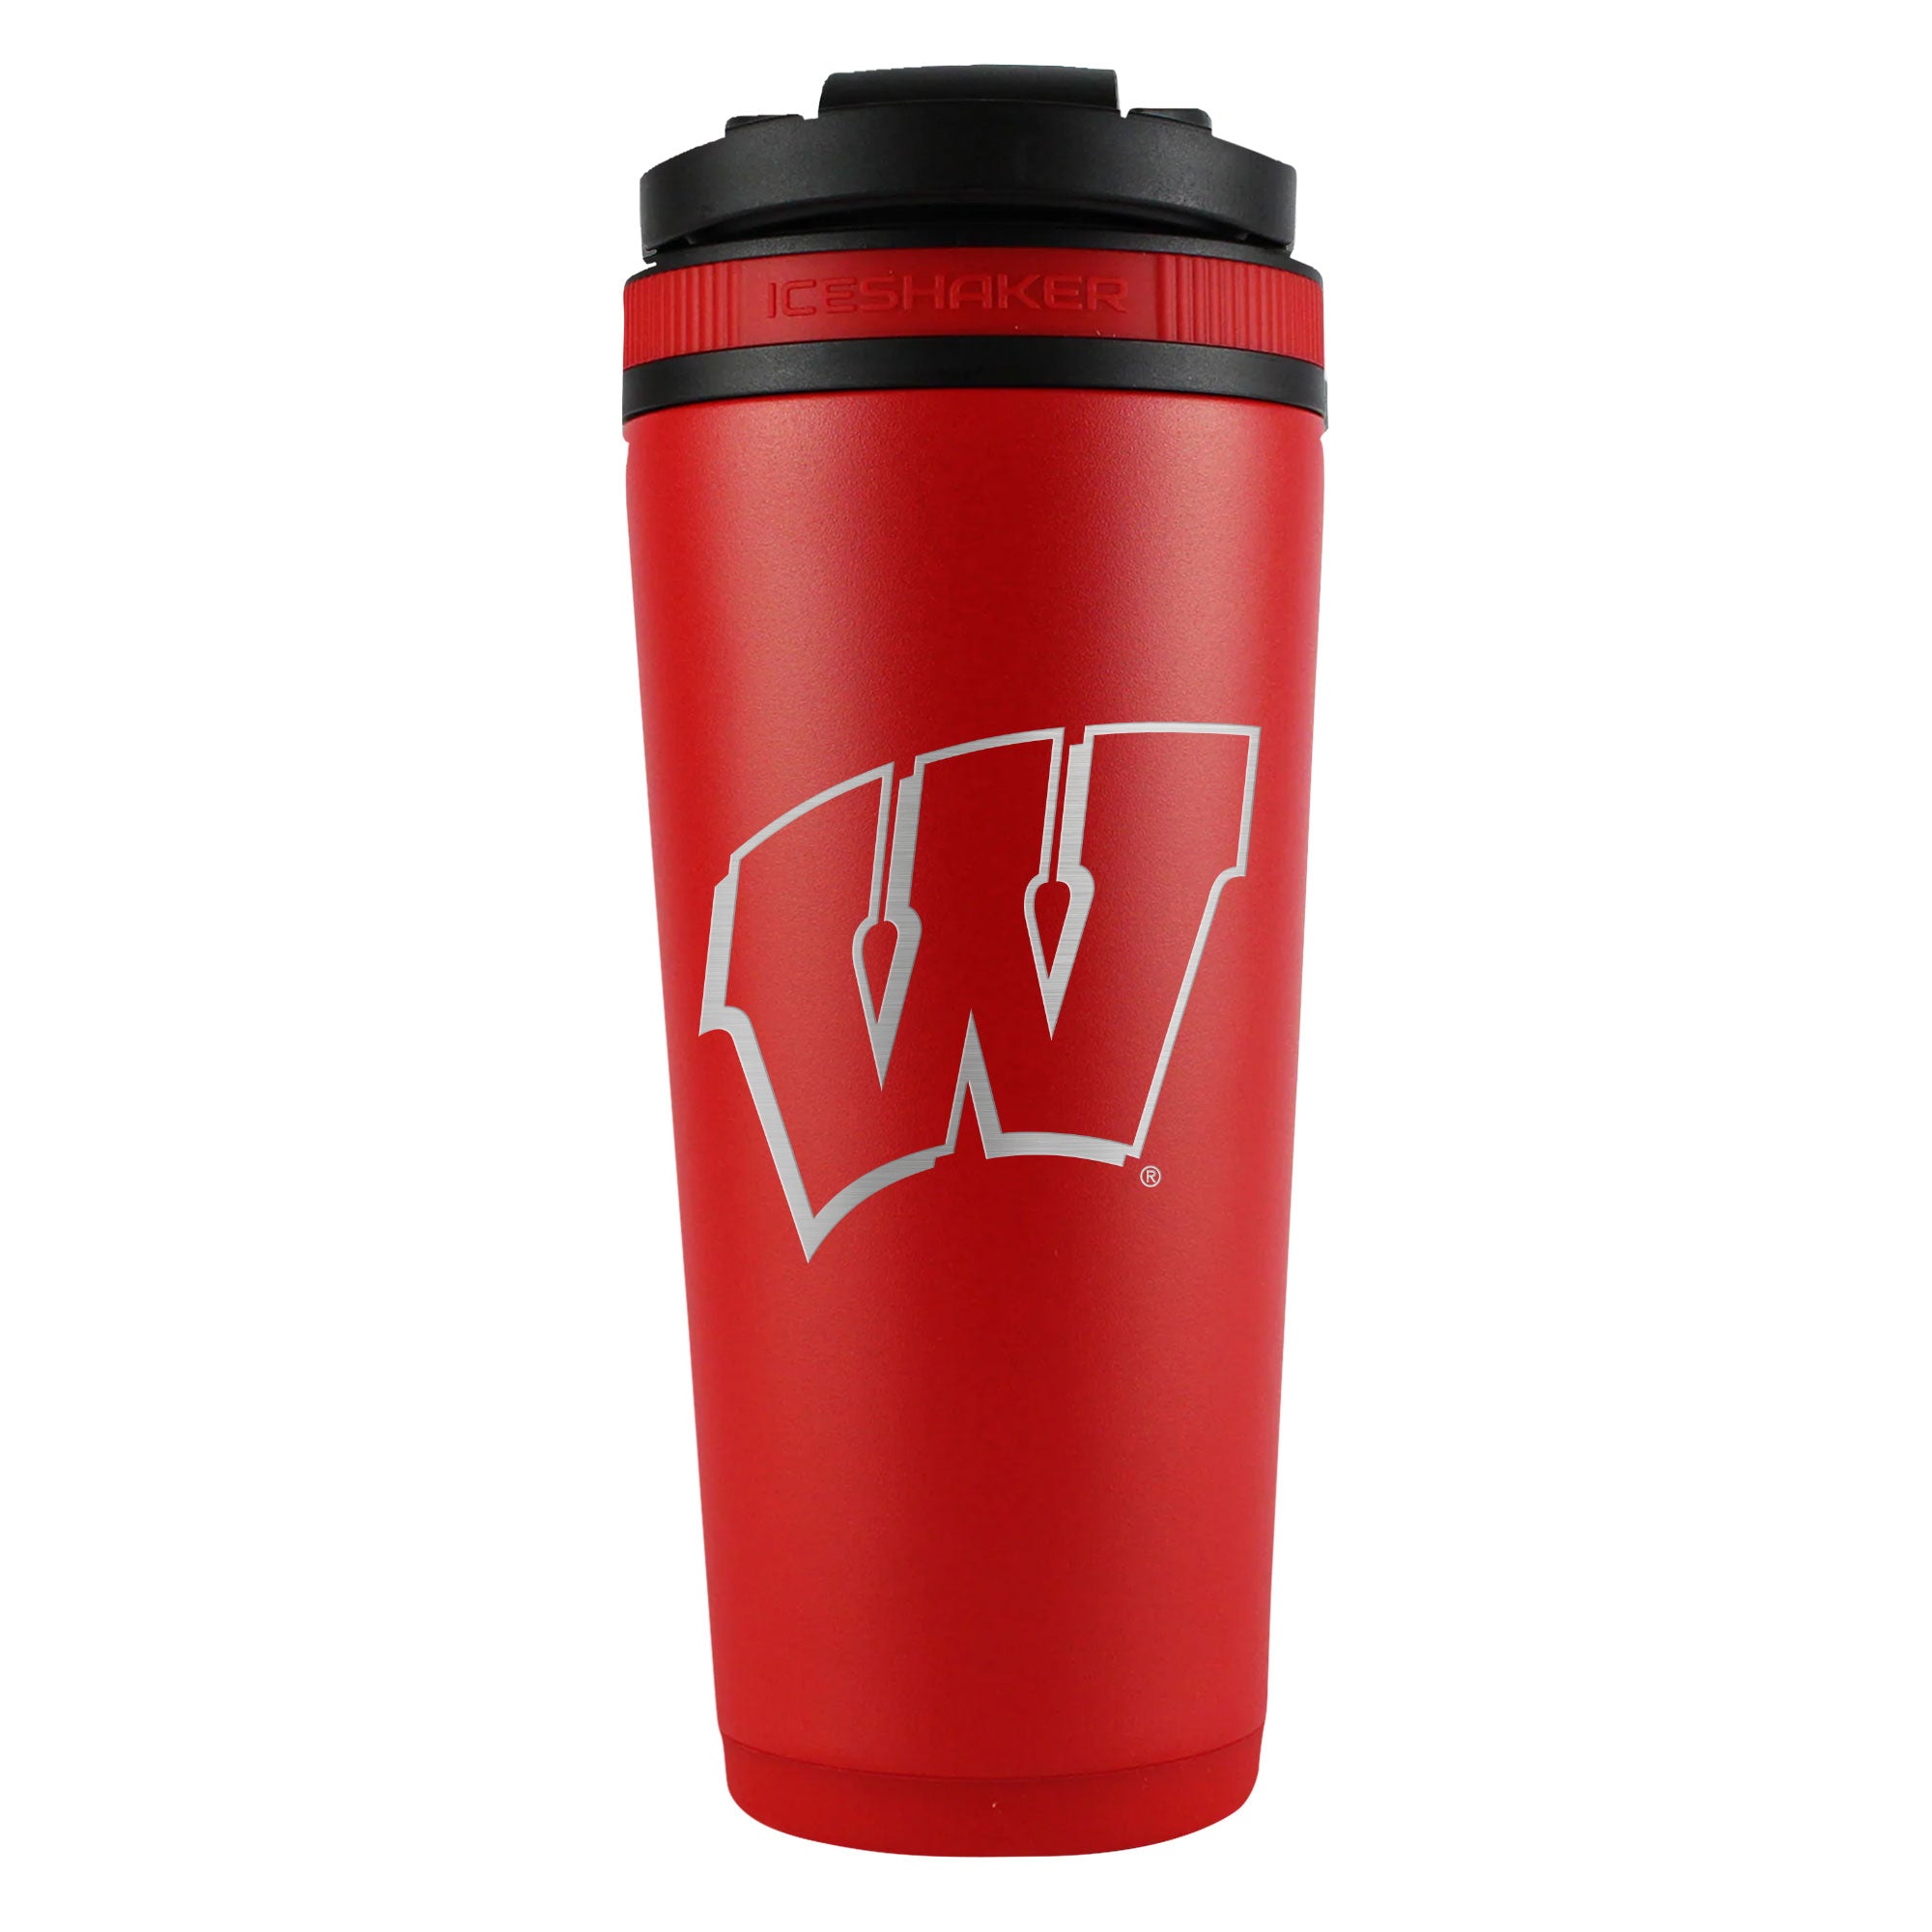 Officially Licensed University of Wisconsin 26oz Ice Shaker